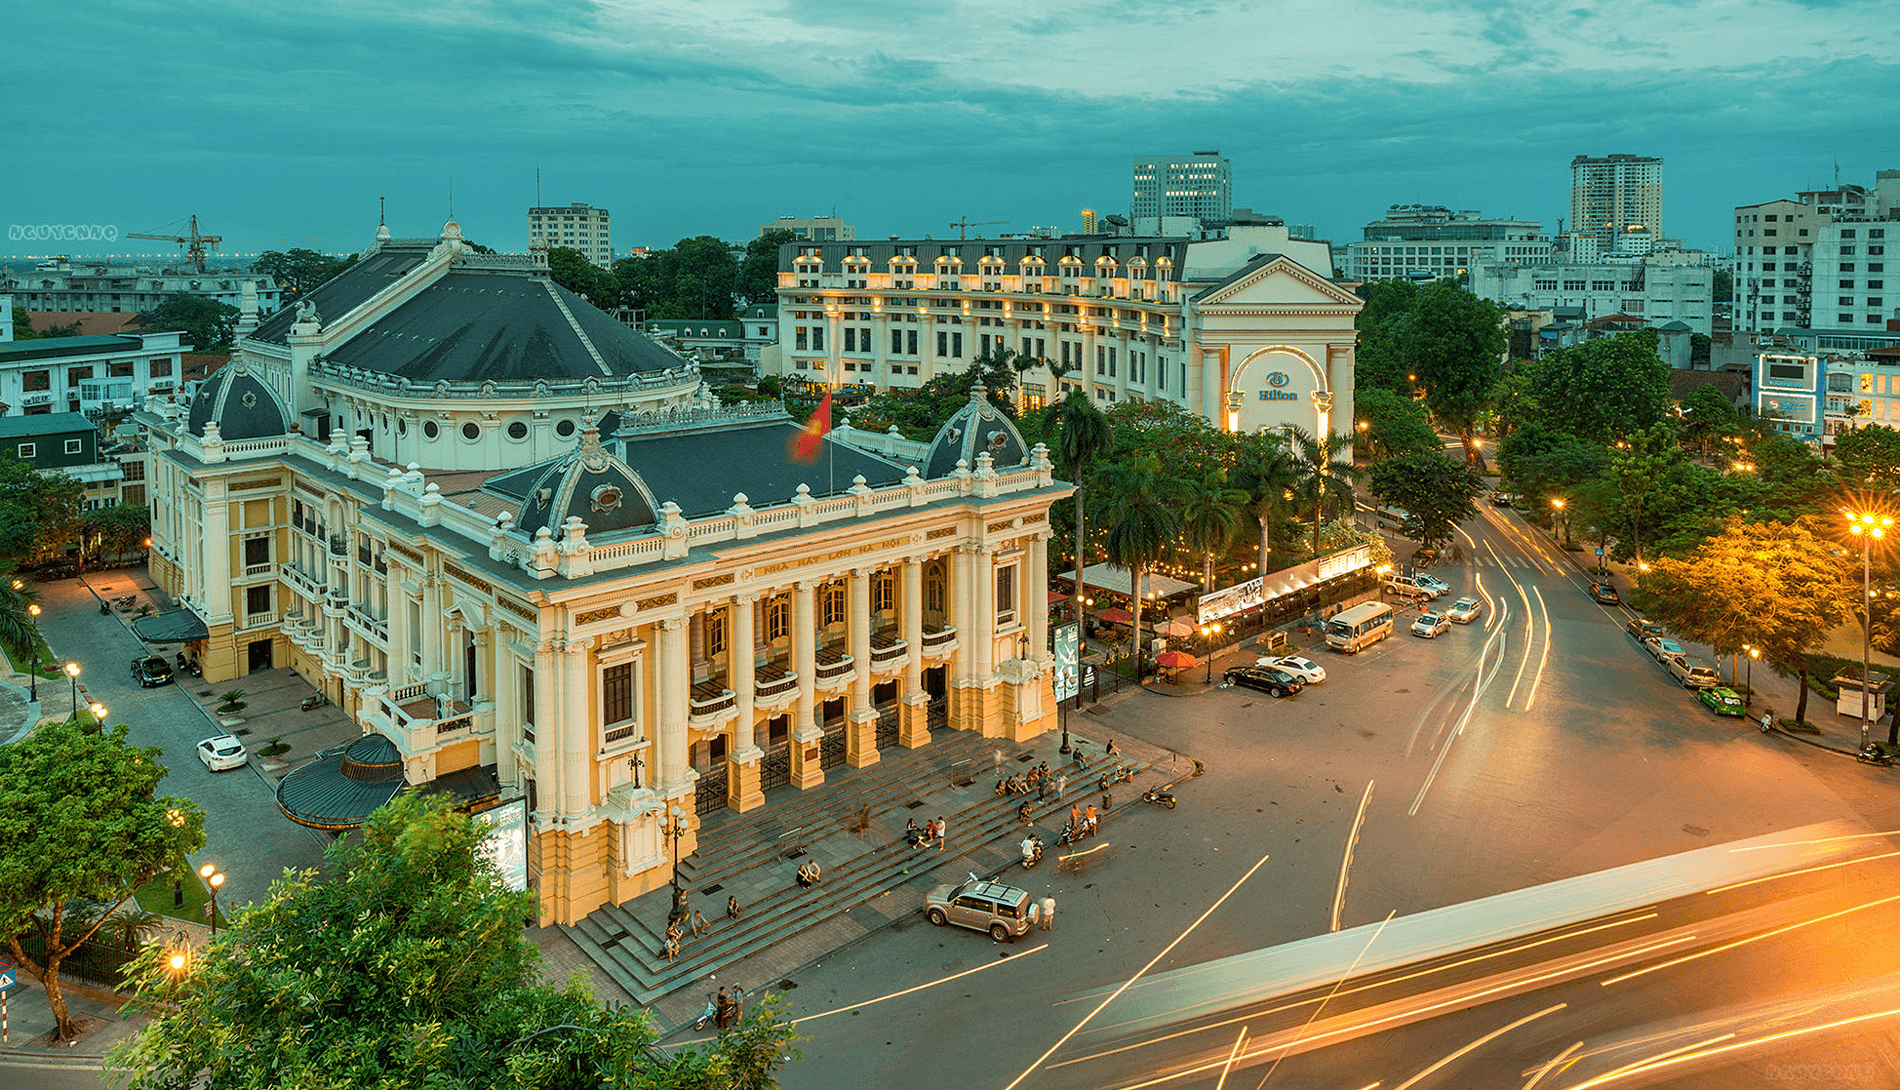 Top things to do in Hanoi Vietnam: Wander around the Old Quarter